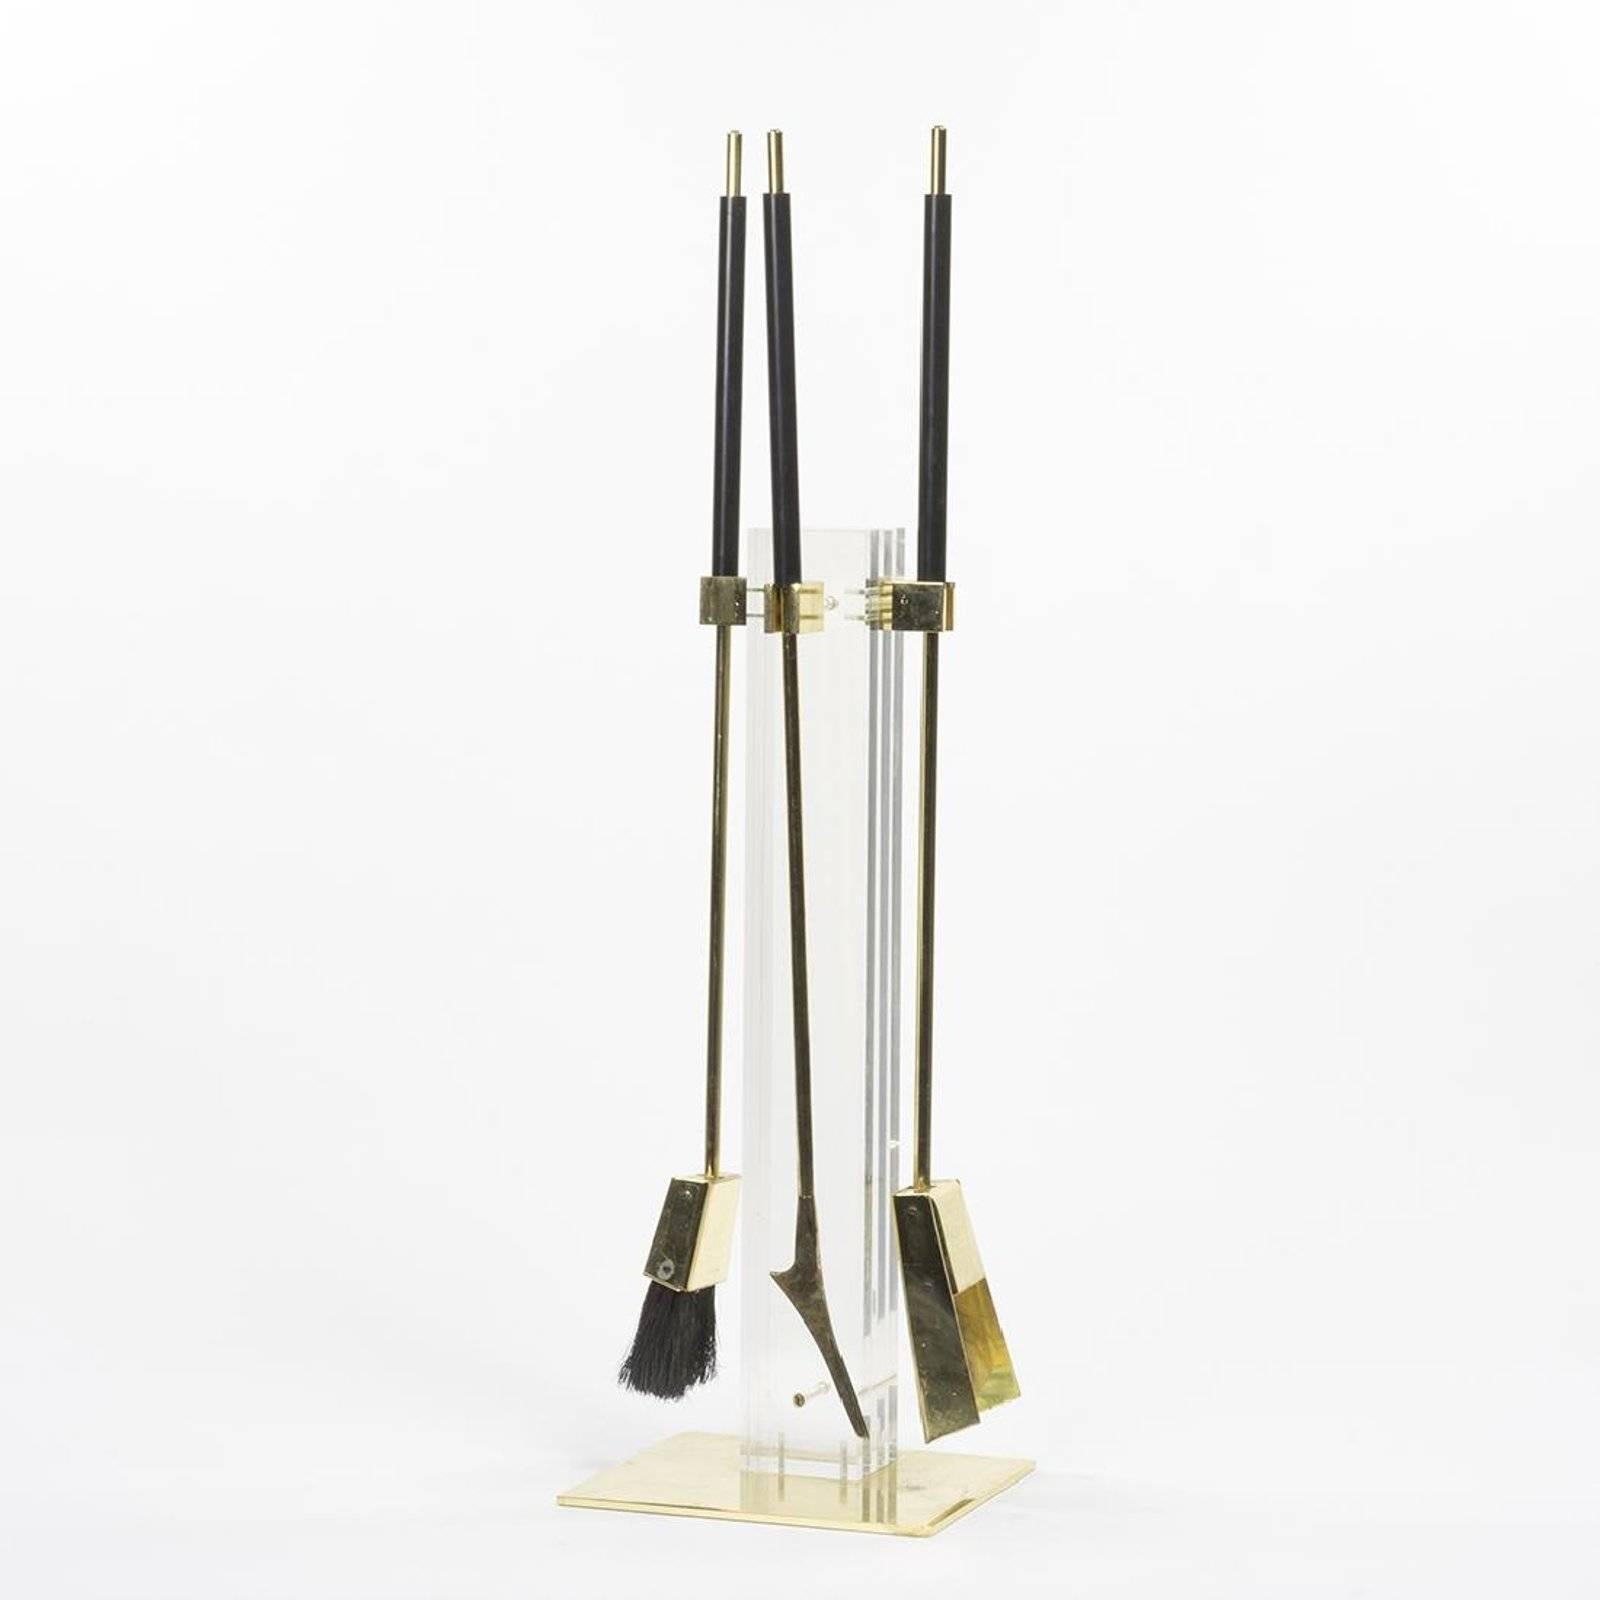 Acrylic and brass fire tools by Albrizzi, Italy, 1970s. Measures: 36